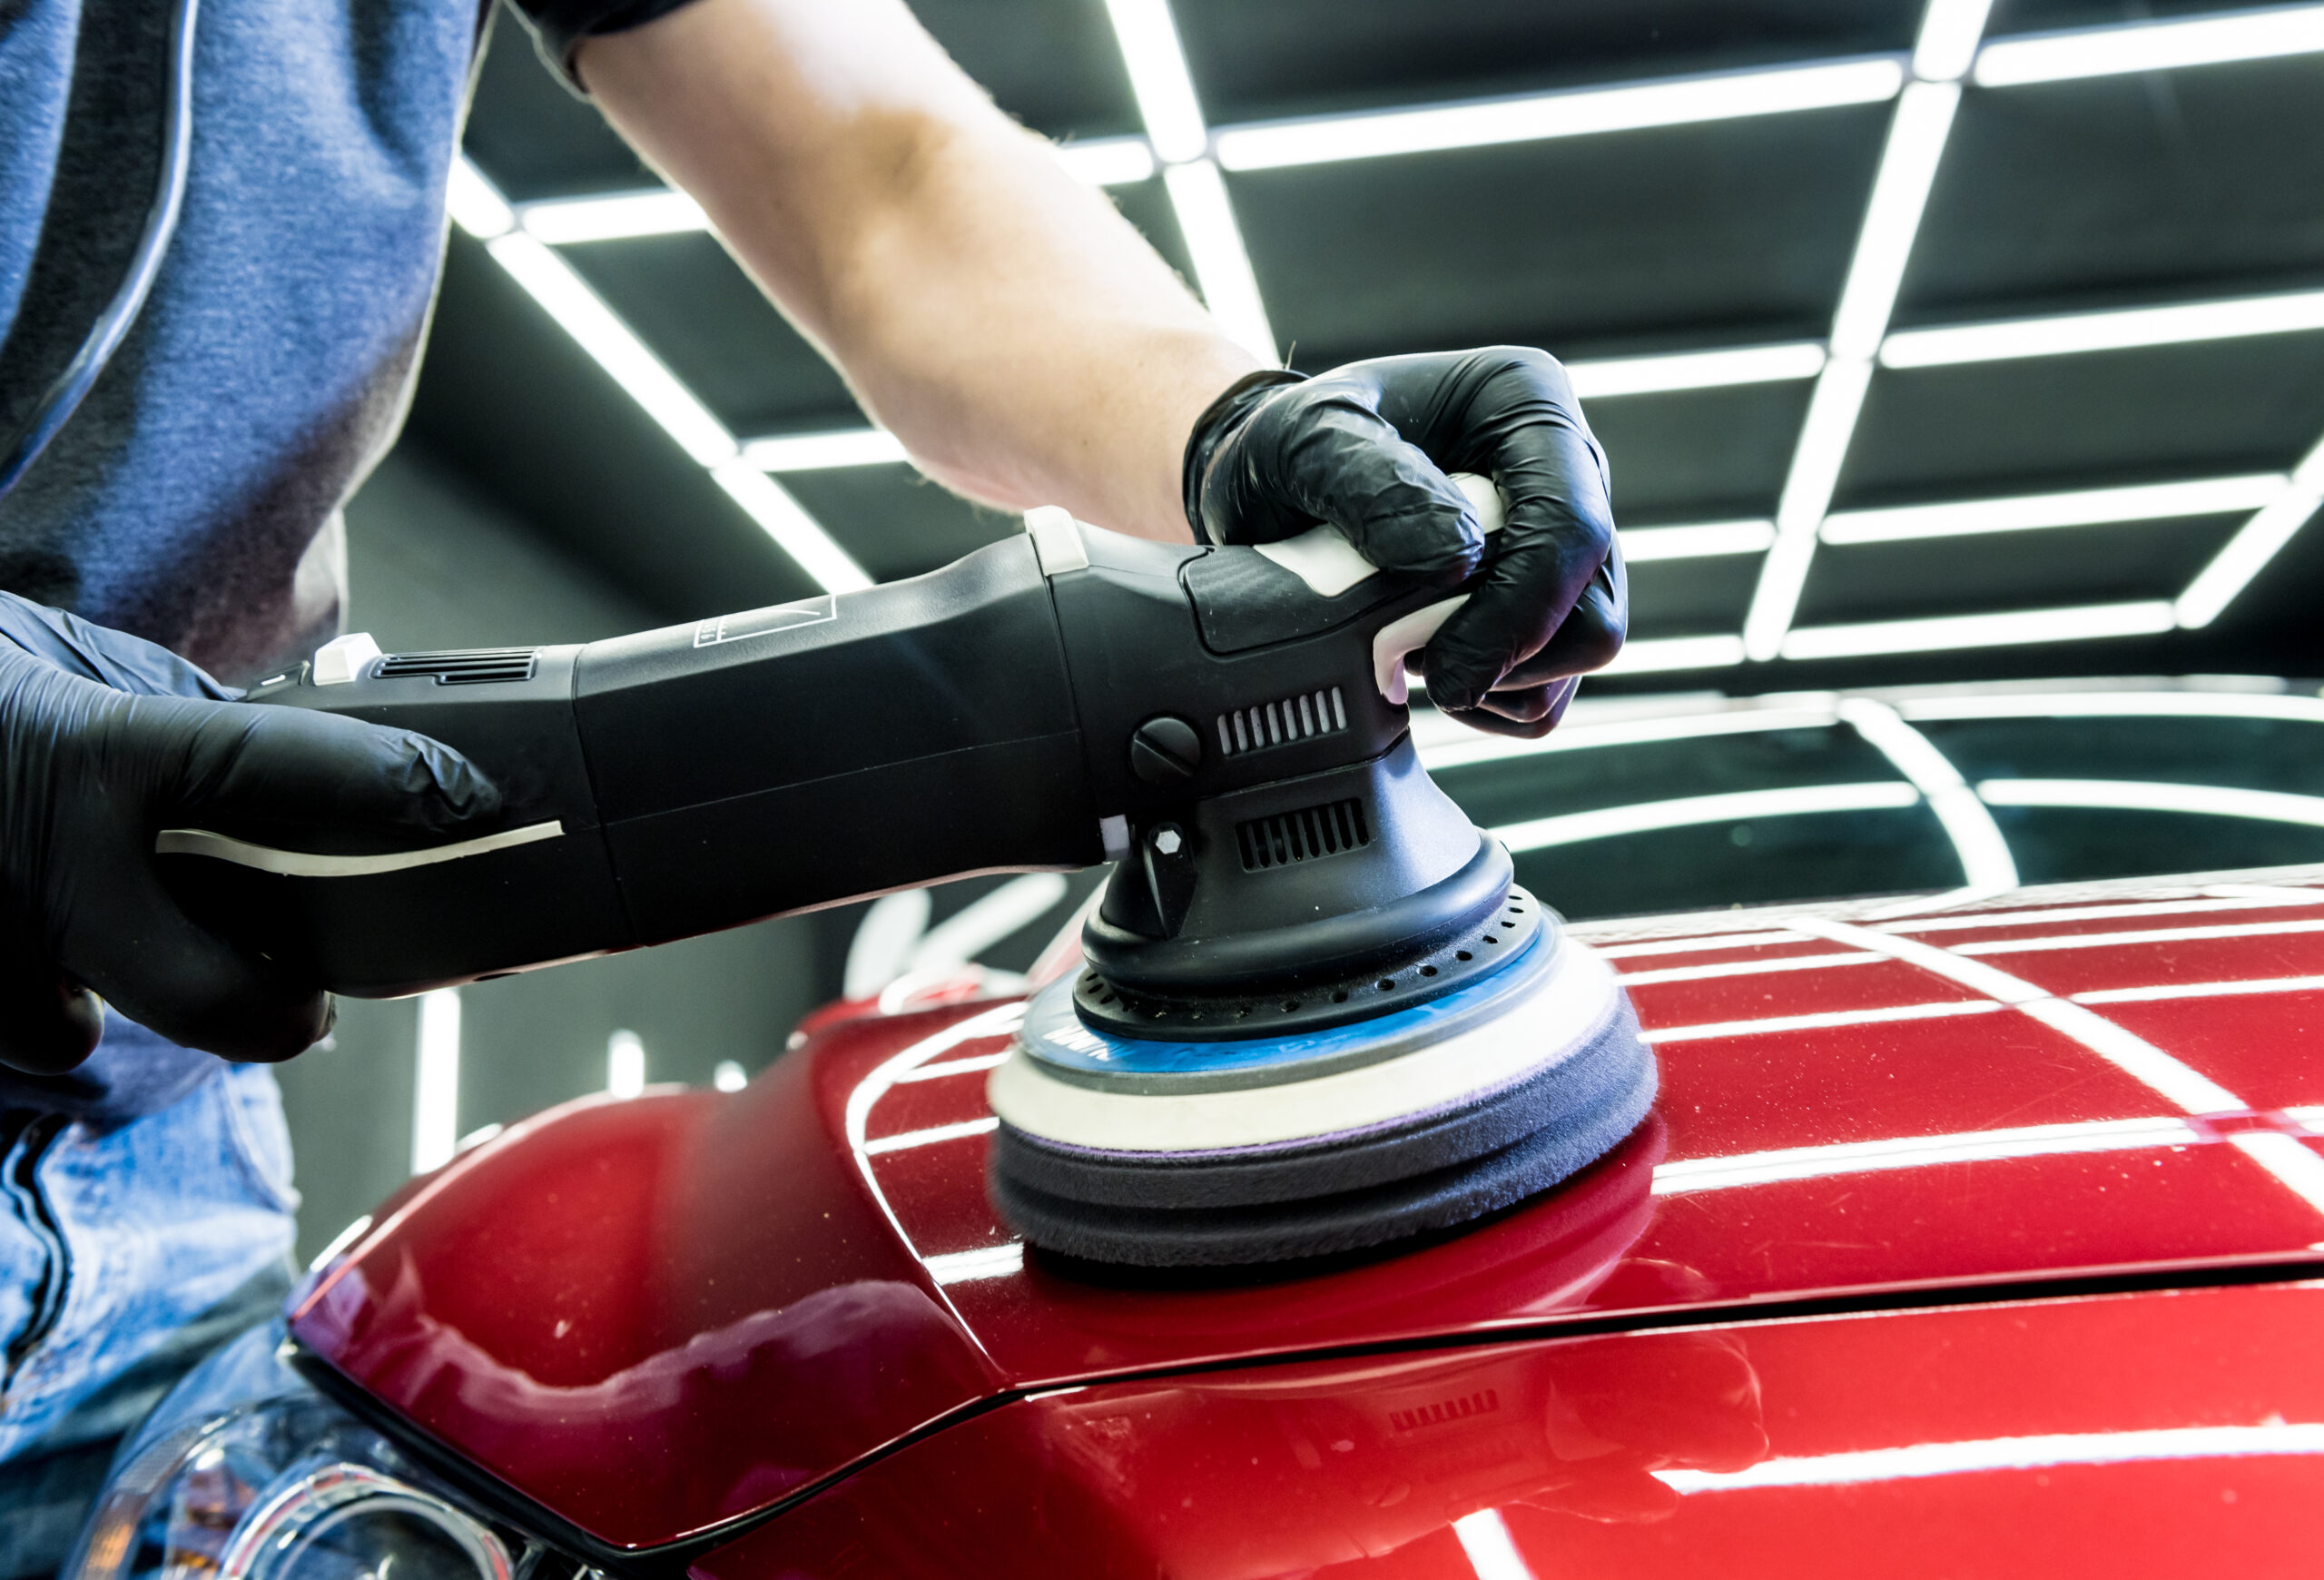 Car service worker polishes a car details with orbital polisher